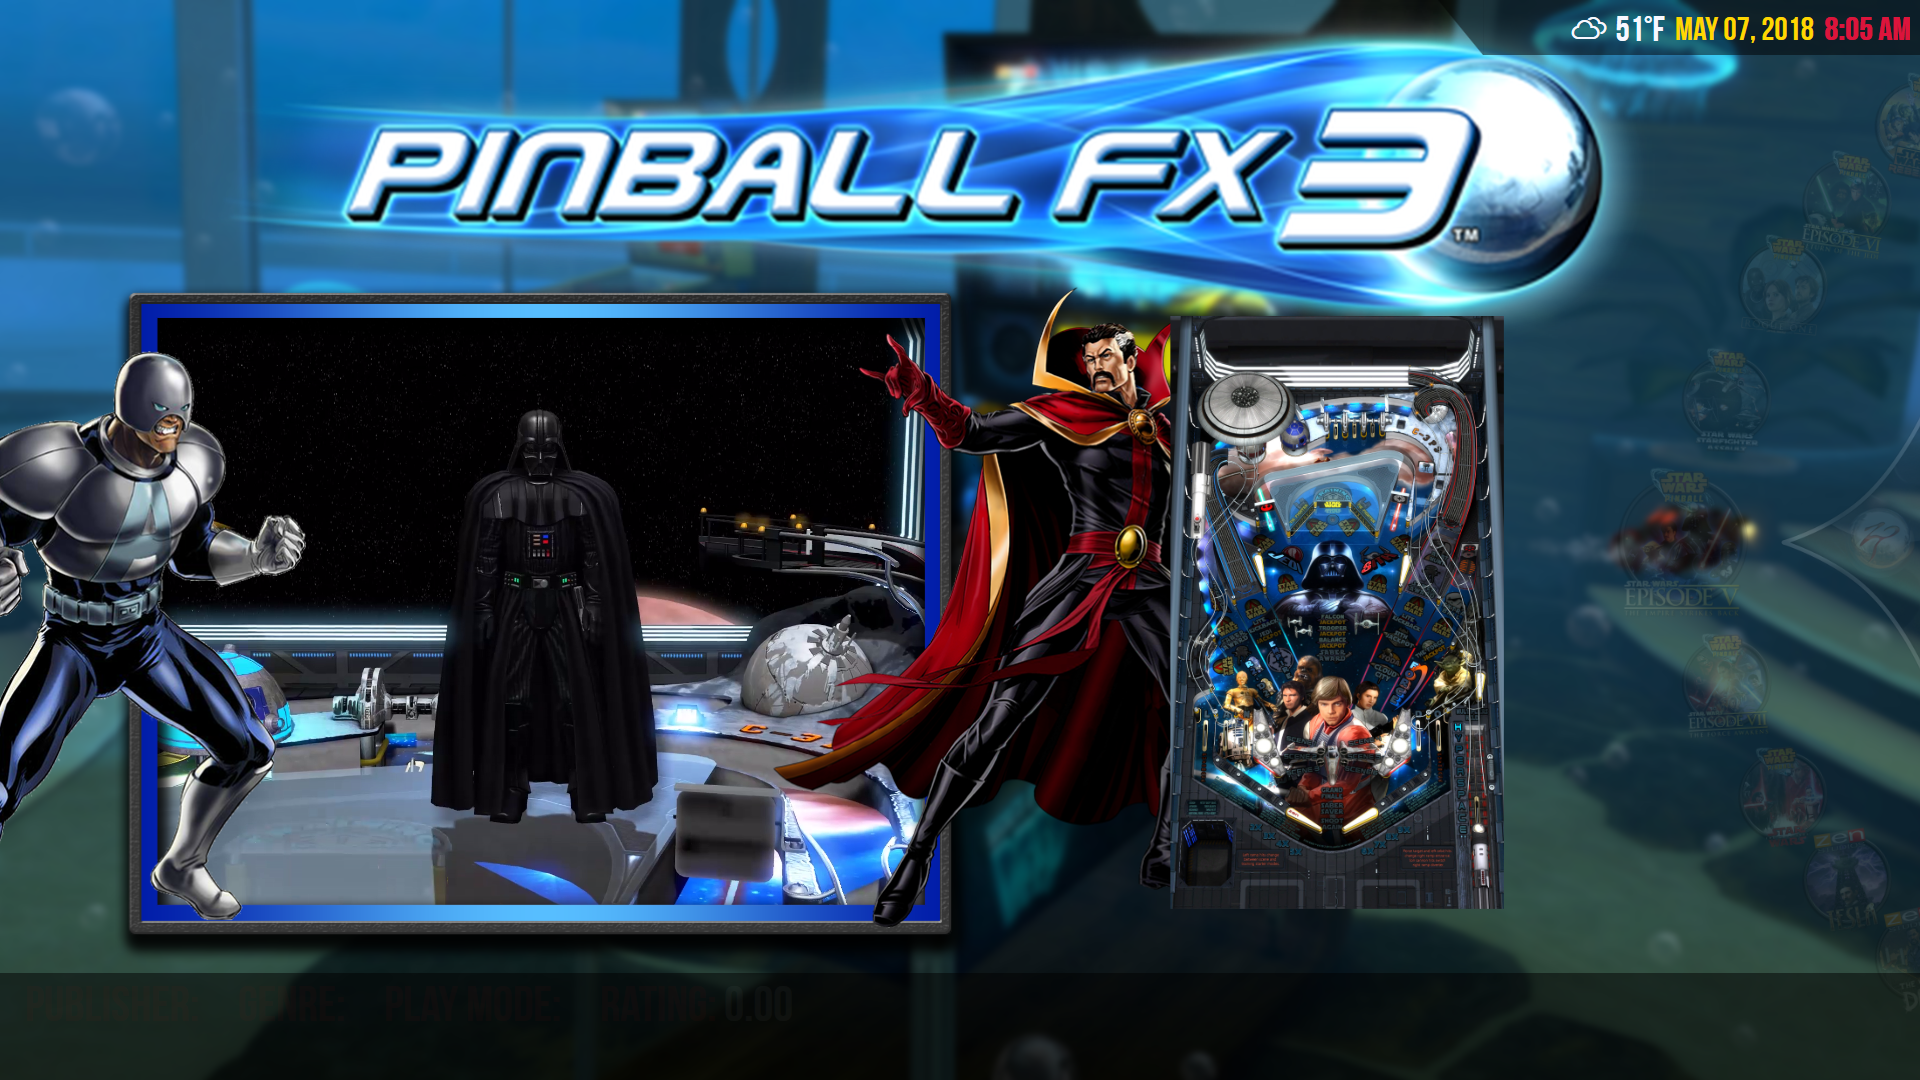 Pinball Fx3 Video Set 4 3 1440x1080 Flyby Videos Game Theme Videos Launchbox Community Forums